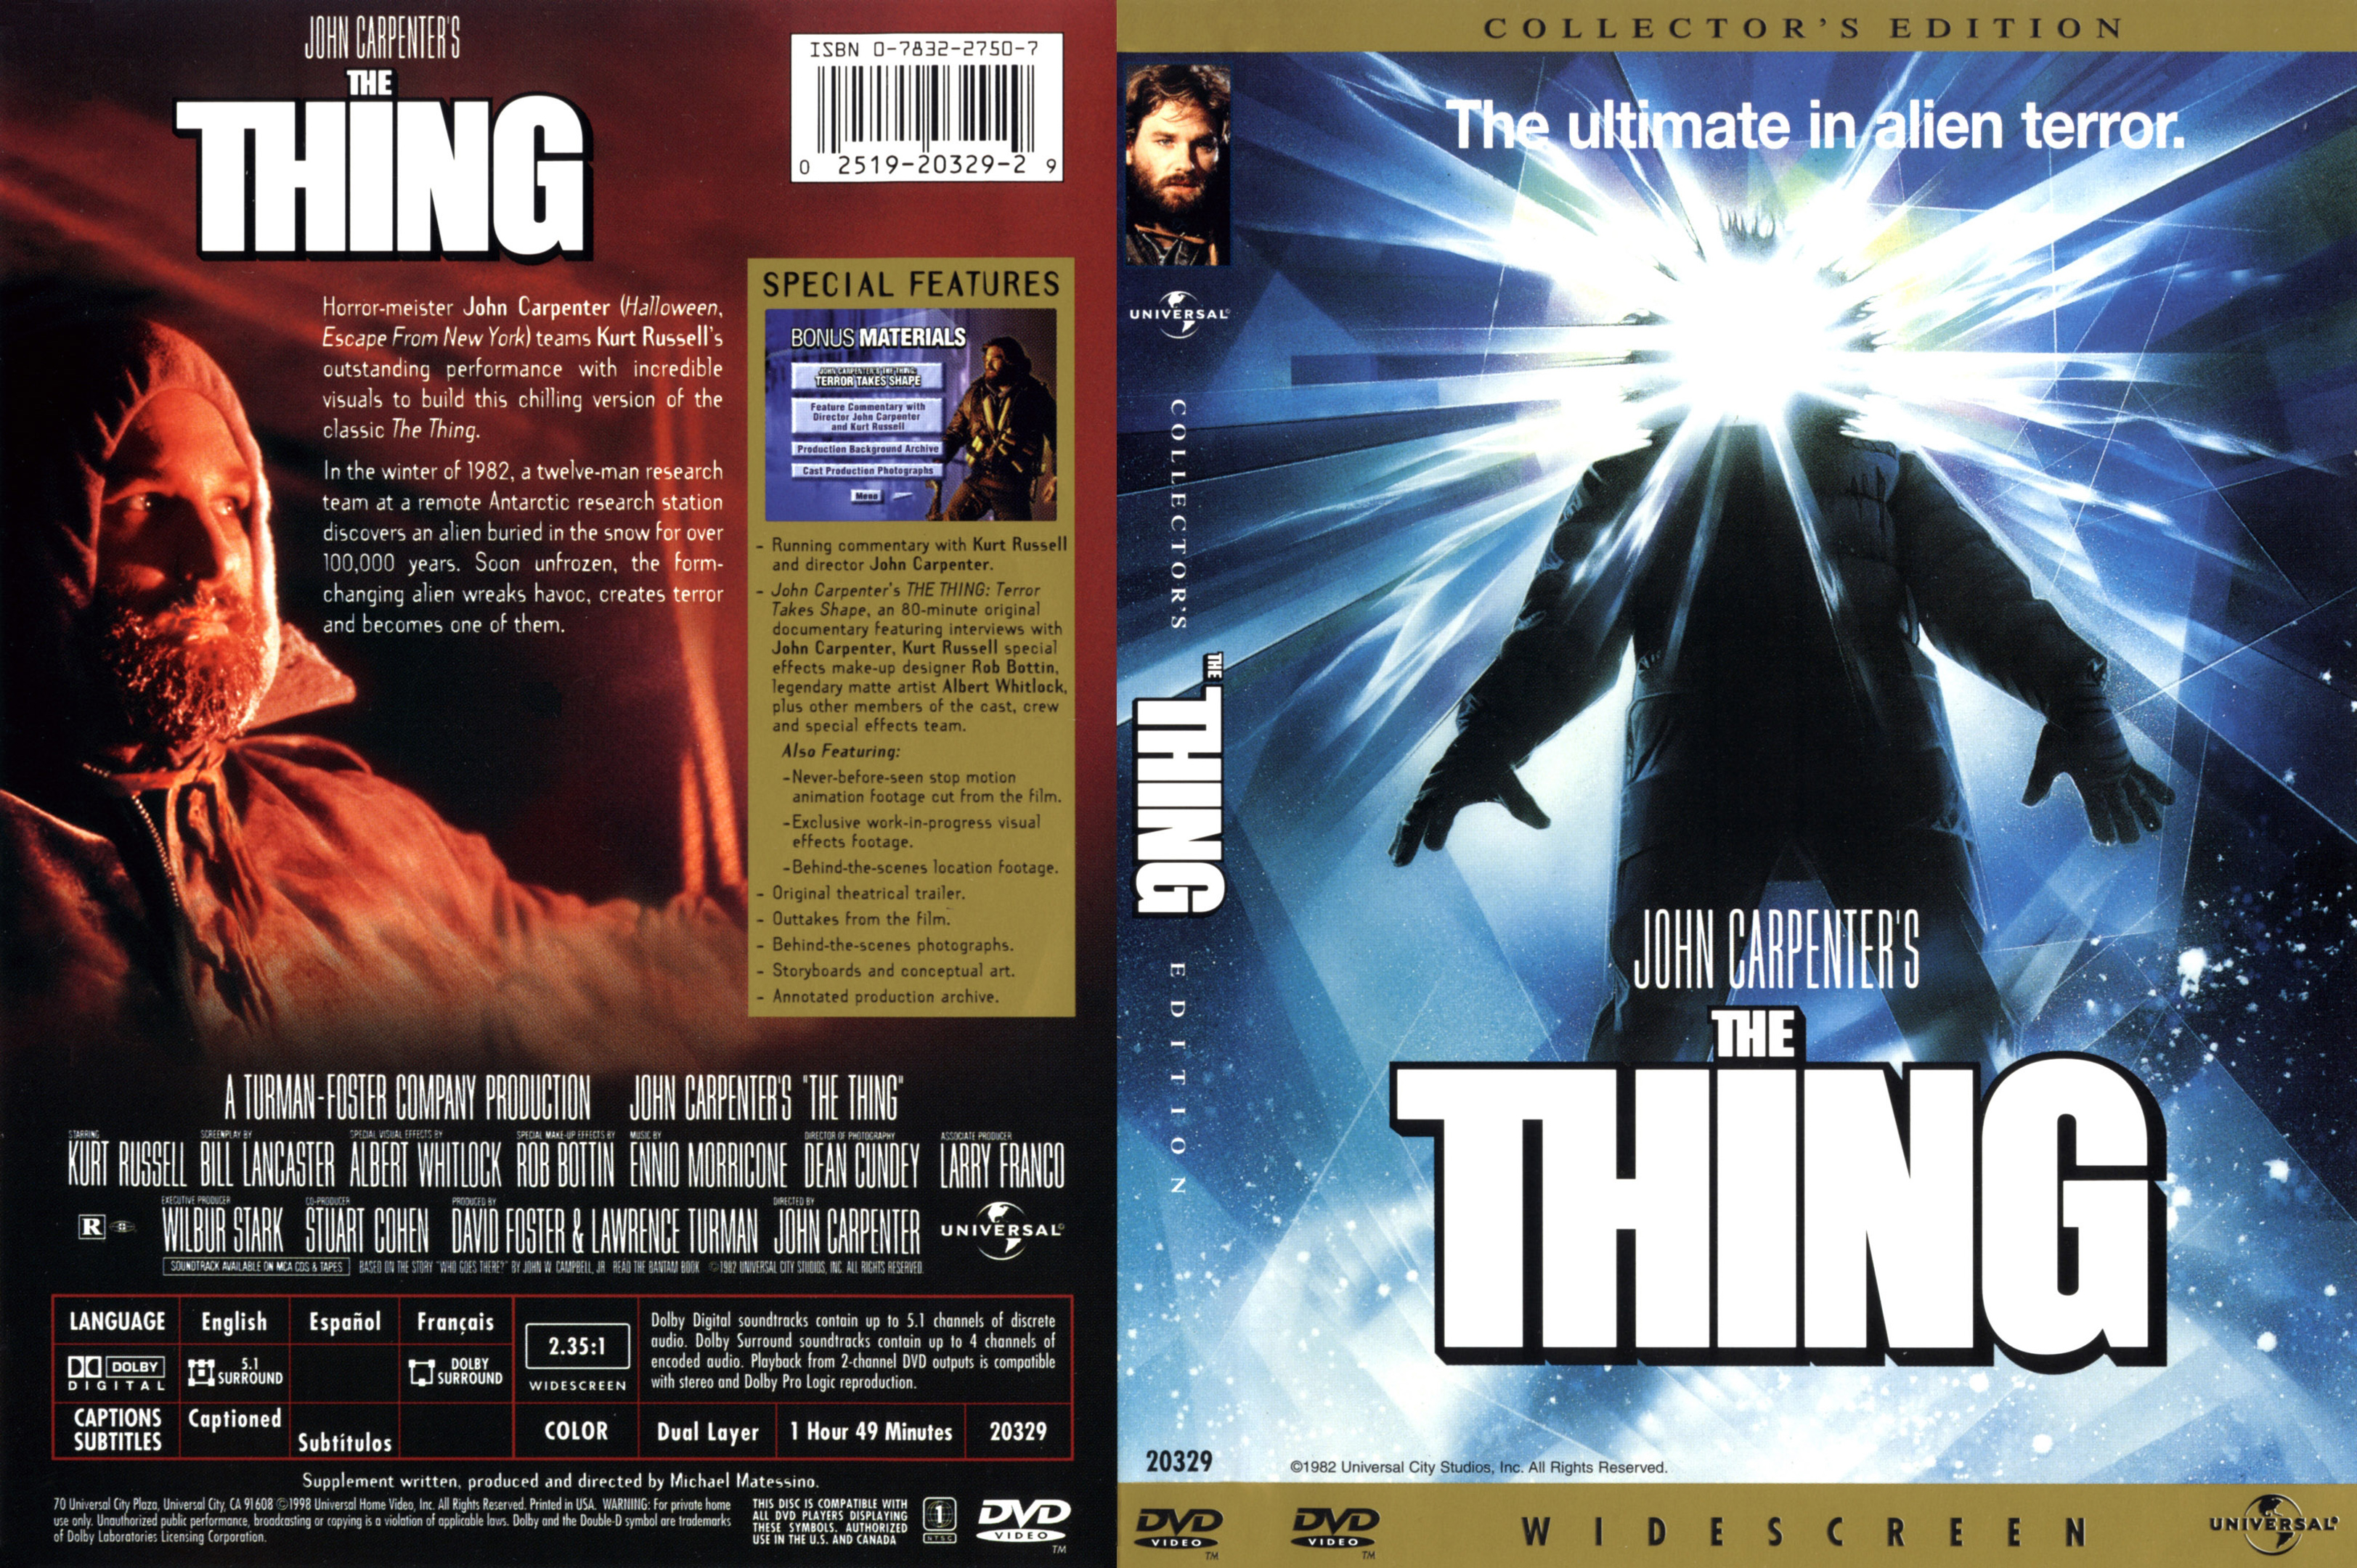 Download The Thing 1982 Full Hd Quality